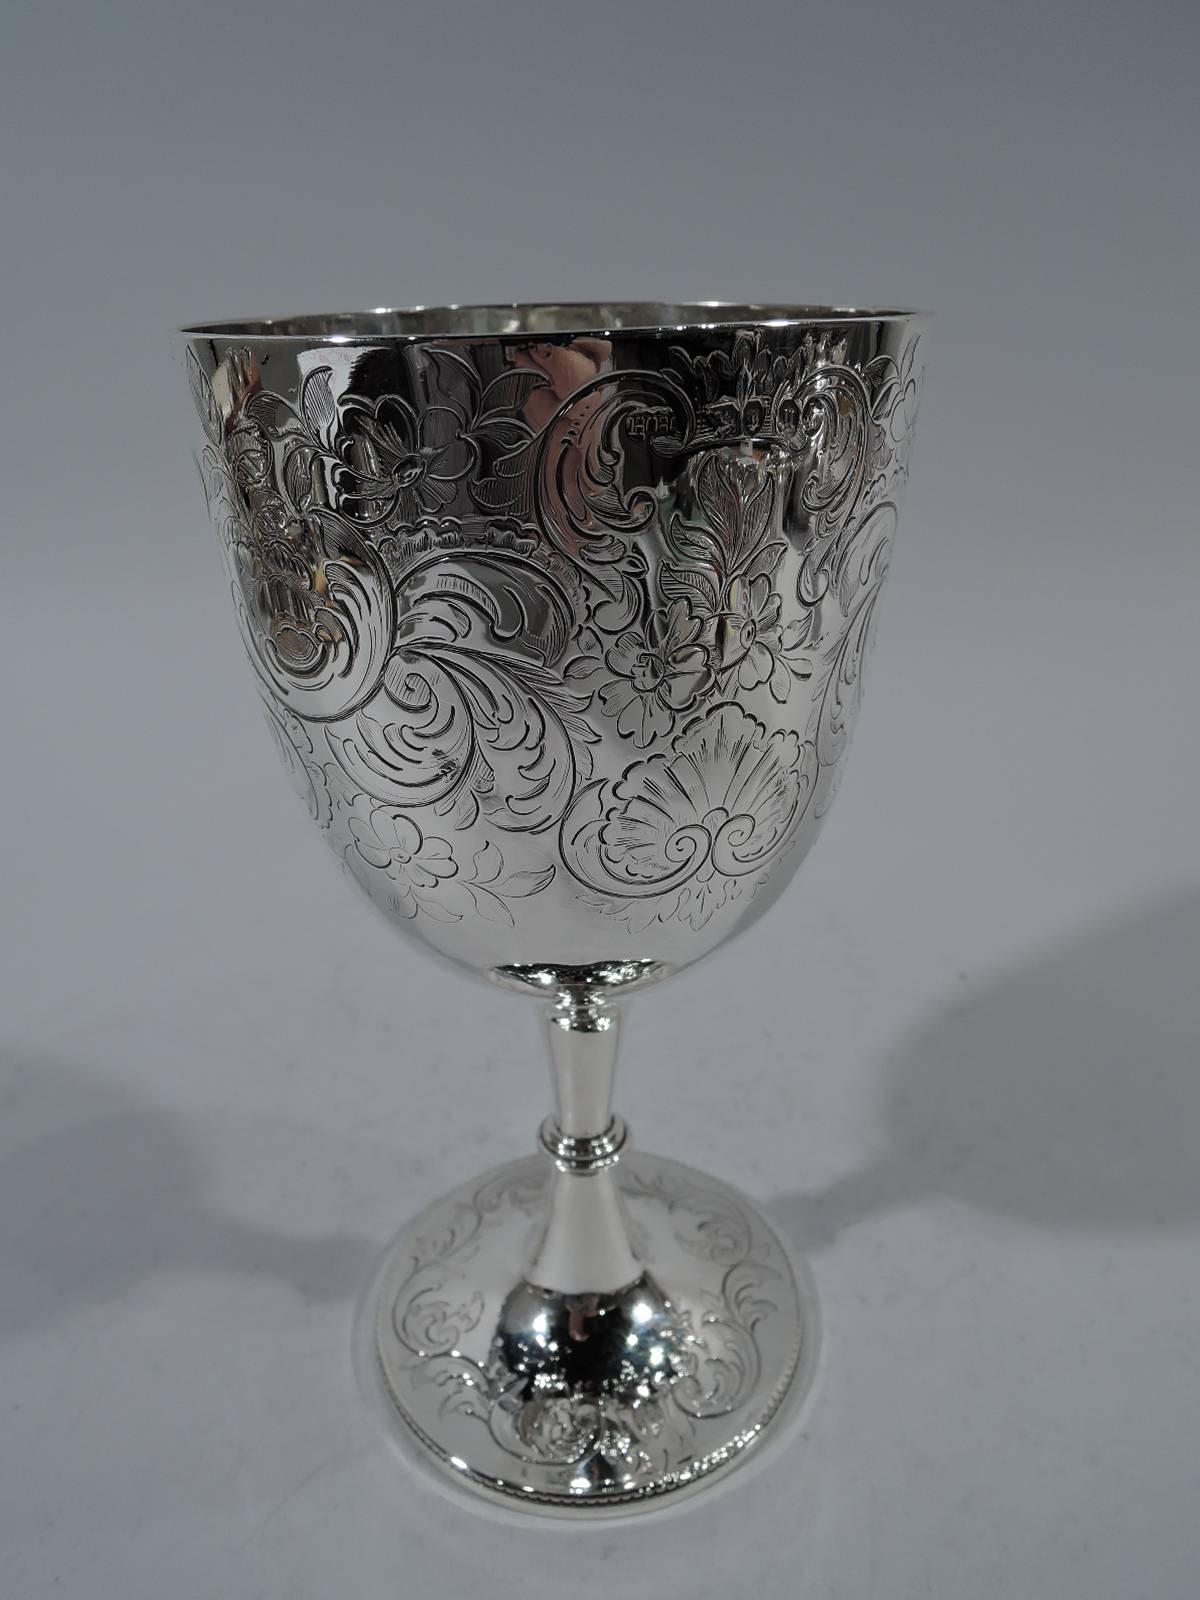 Victorian sterling silver goblet. Made by Henry Holland in London in 1862. Tapering and curved bowl on knopped and tapering stem and raised foot. Leaves, flowers, and shells engraved on bowl. Feathery scrolled frame (vacant). Same ornament on foot